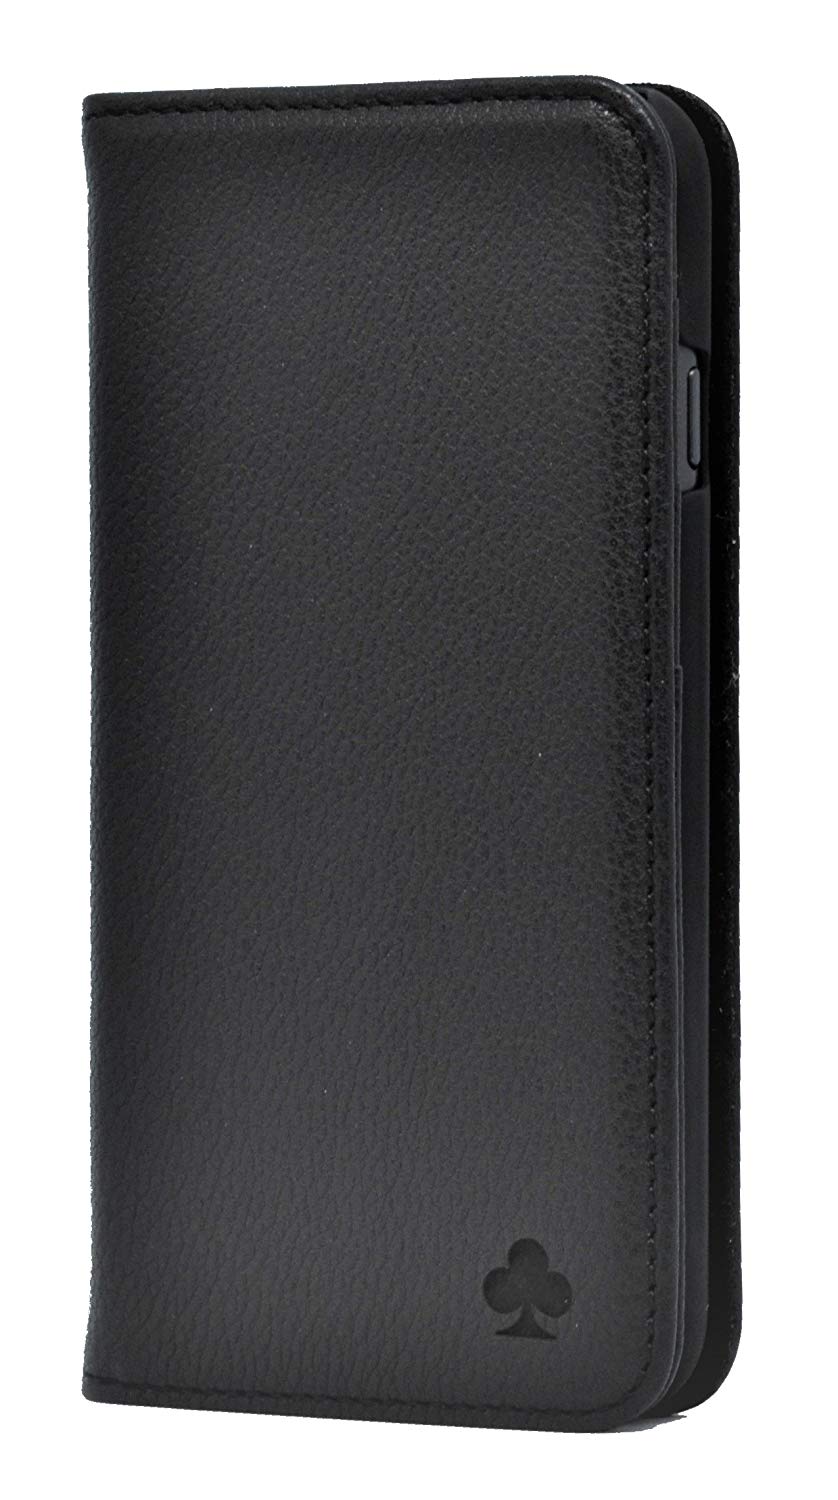 iPhone XS / X Leather Case. Premium Slim Genuine Leather Stand Case/Cover/Wallet (Pure Black)